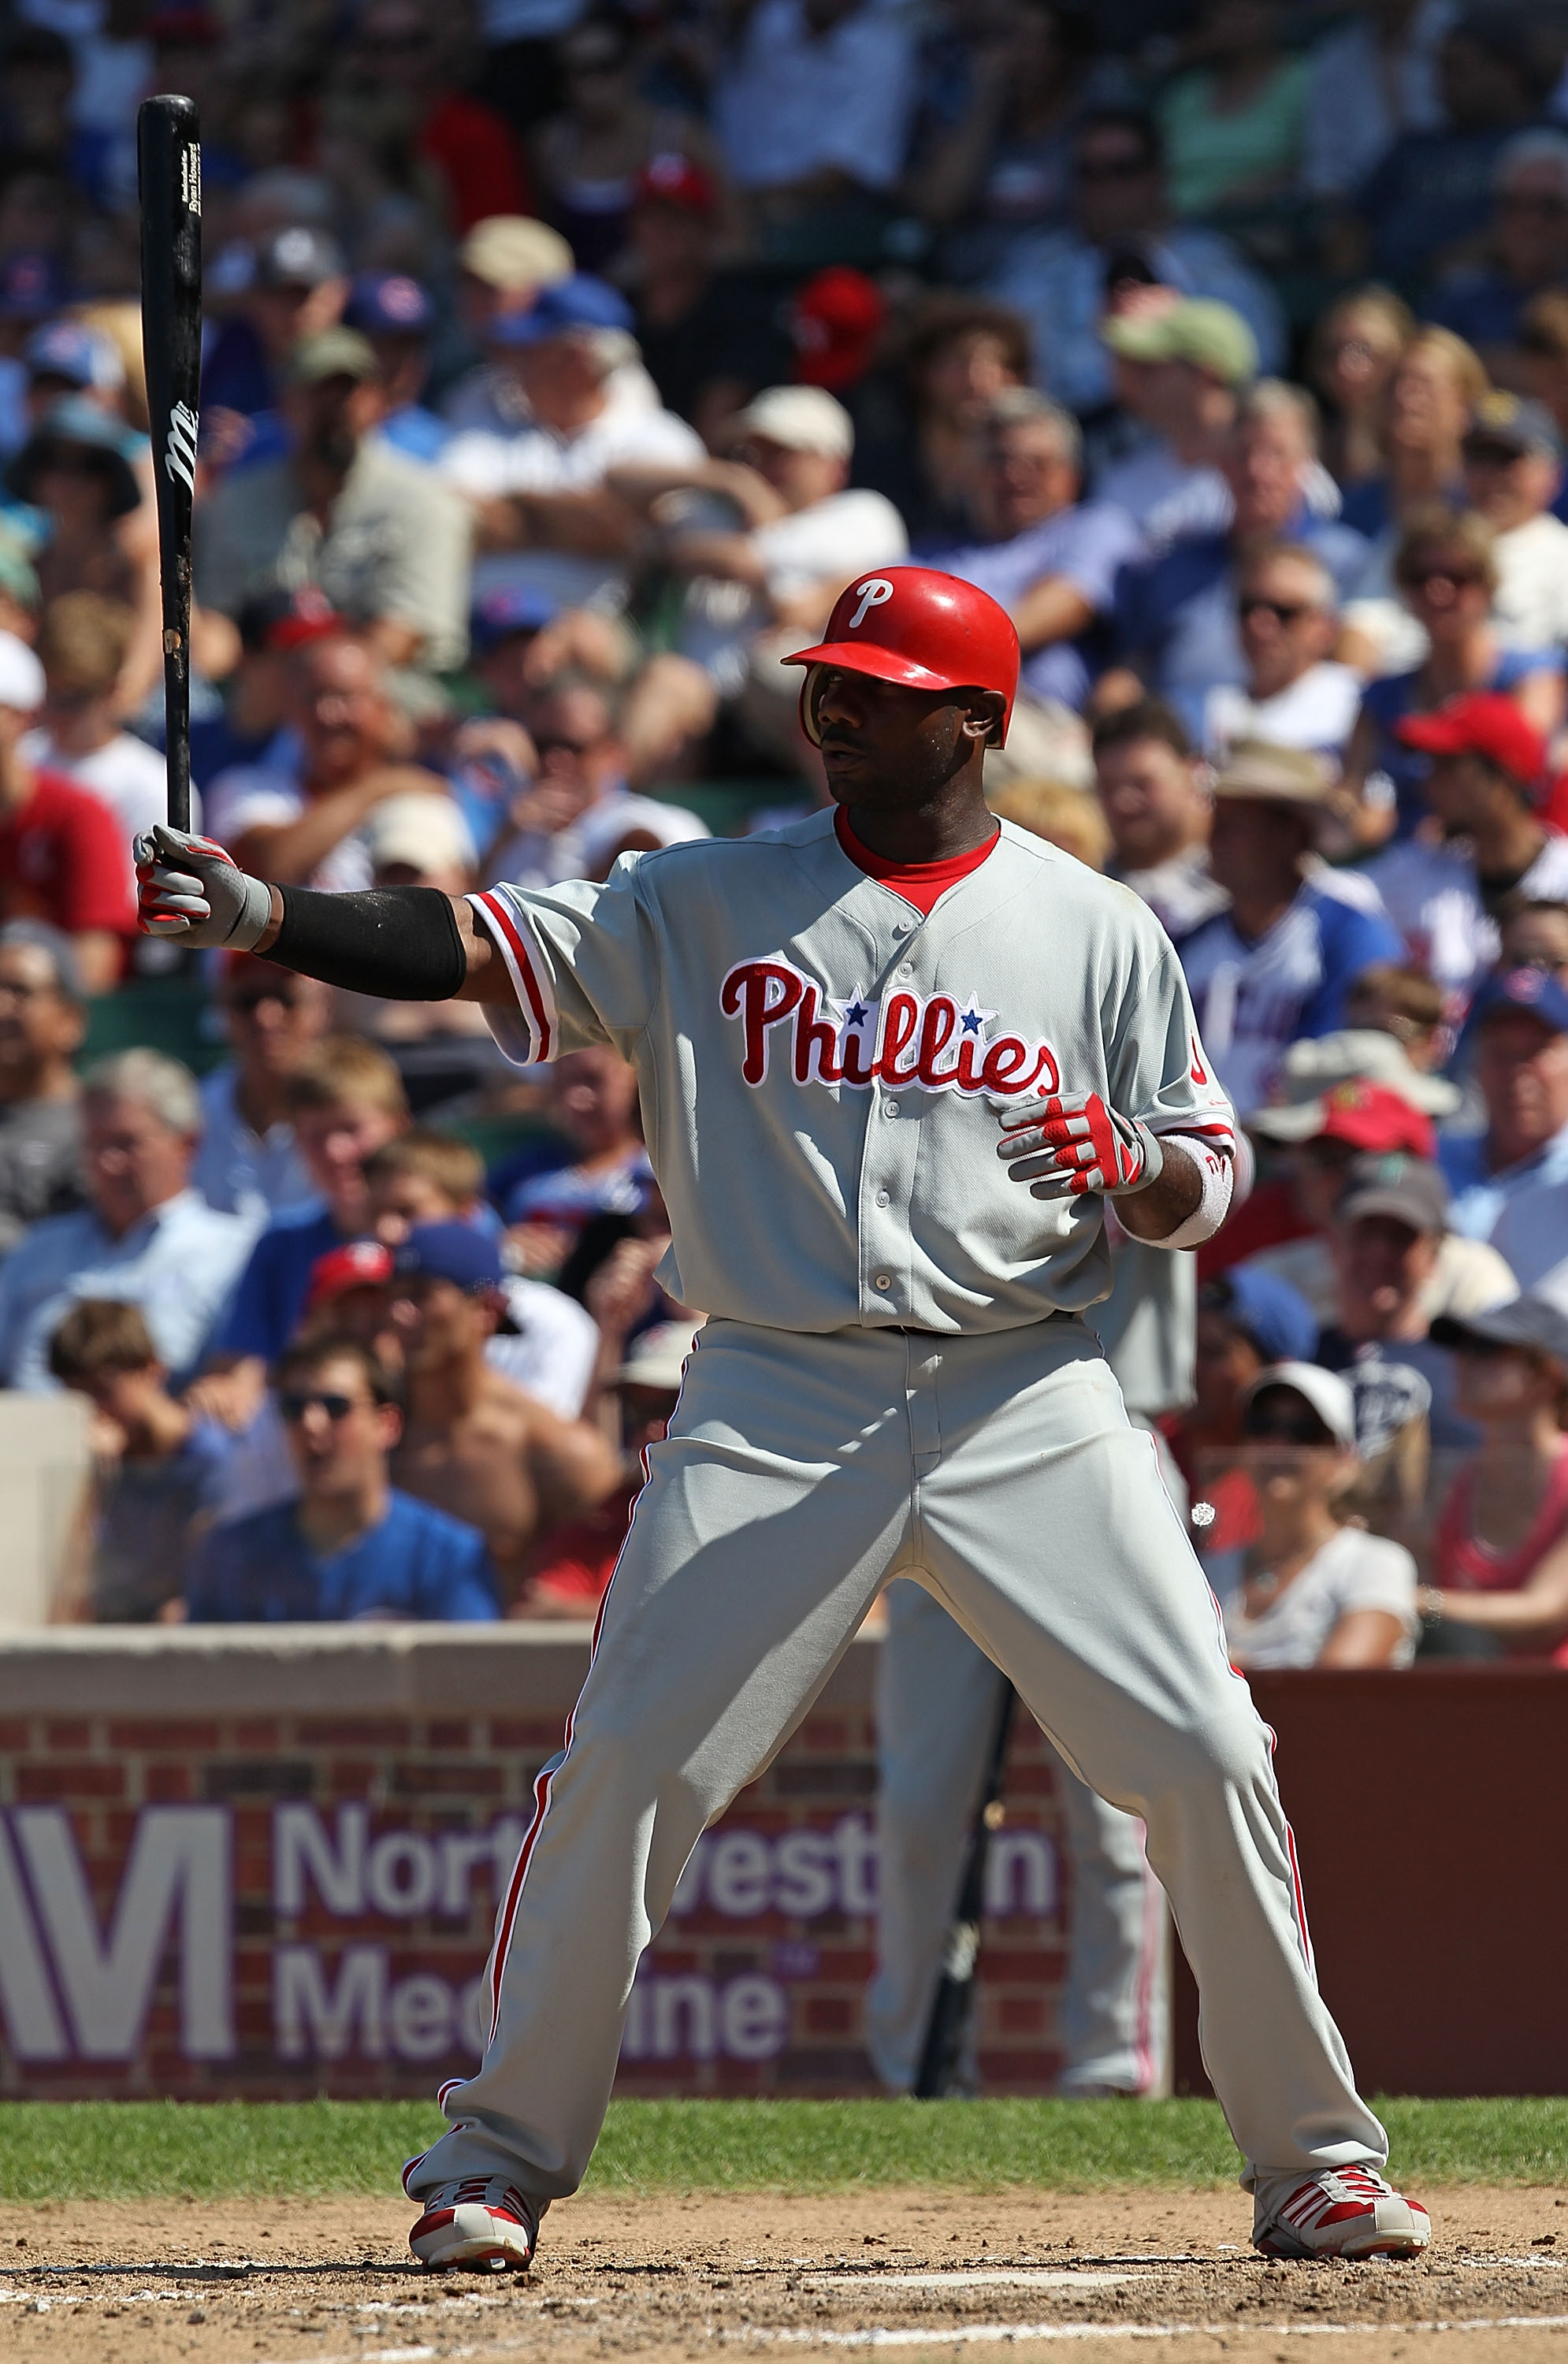 September Is the Hottest Month: Analyzing Ryan Howard's September